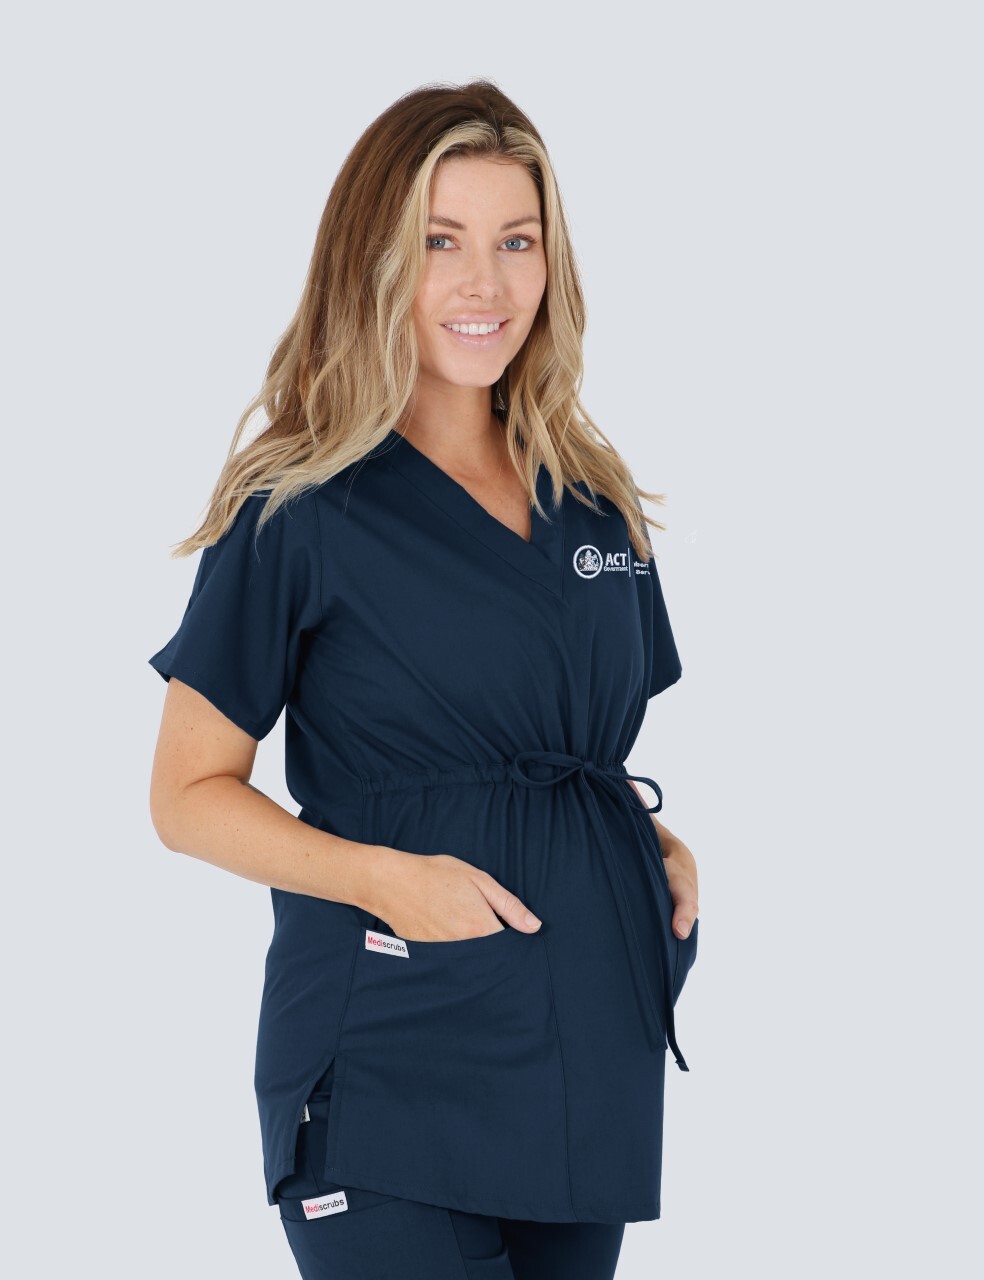 Canberra Hospital (ACT) - Acute Social Work (Maternity Scrub Top in Navy with Maternity Cargo Pants incl Logos)